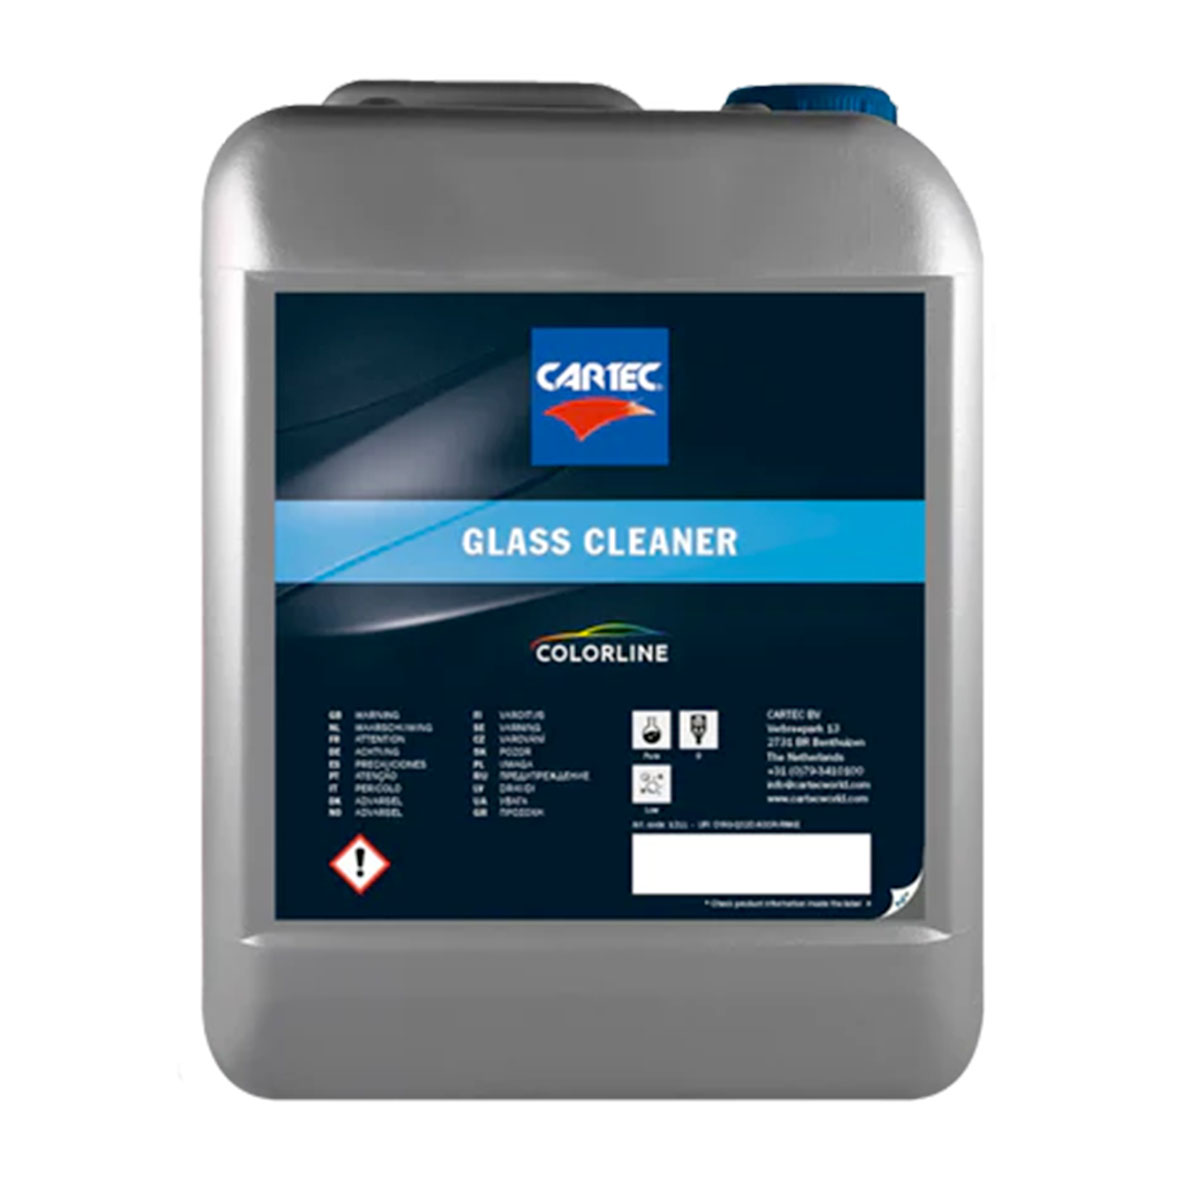 Cartec Colorline Glass Cleaner